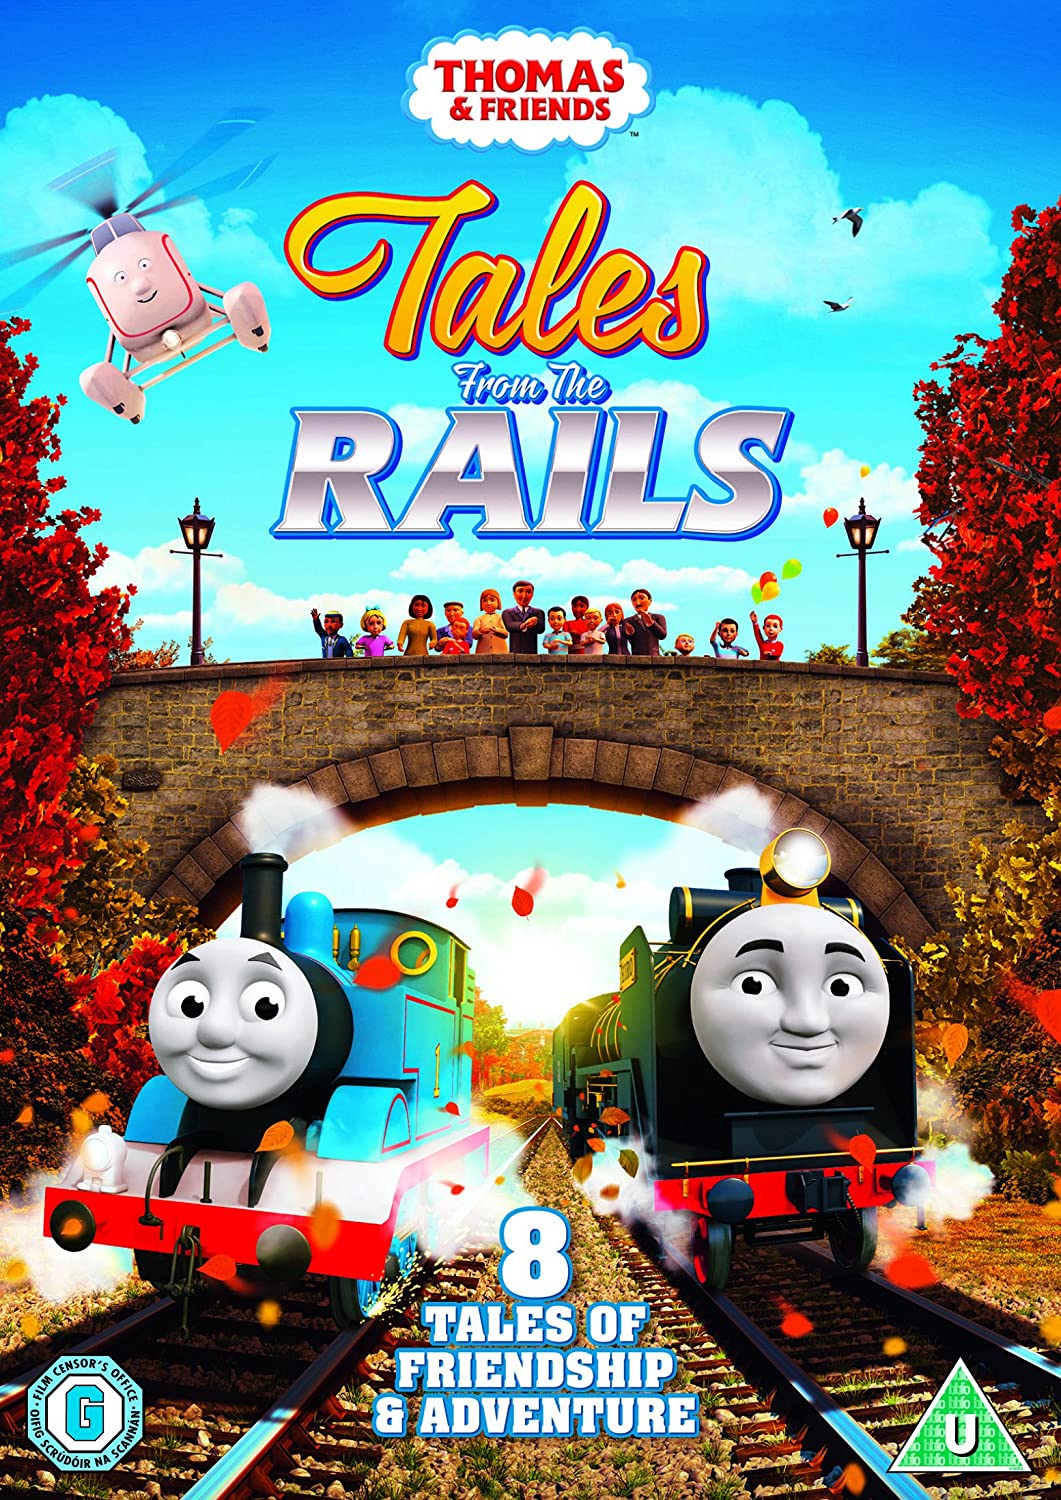 Thomas The Tank Engine And Friends: Tales From The Rails - Family [DVD]